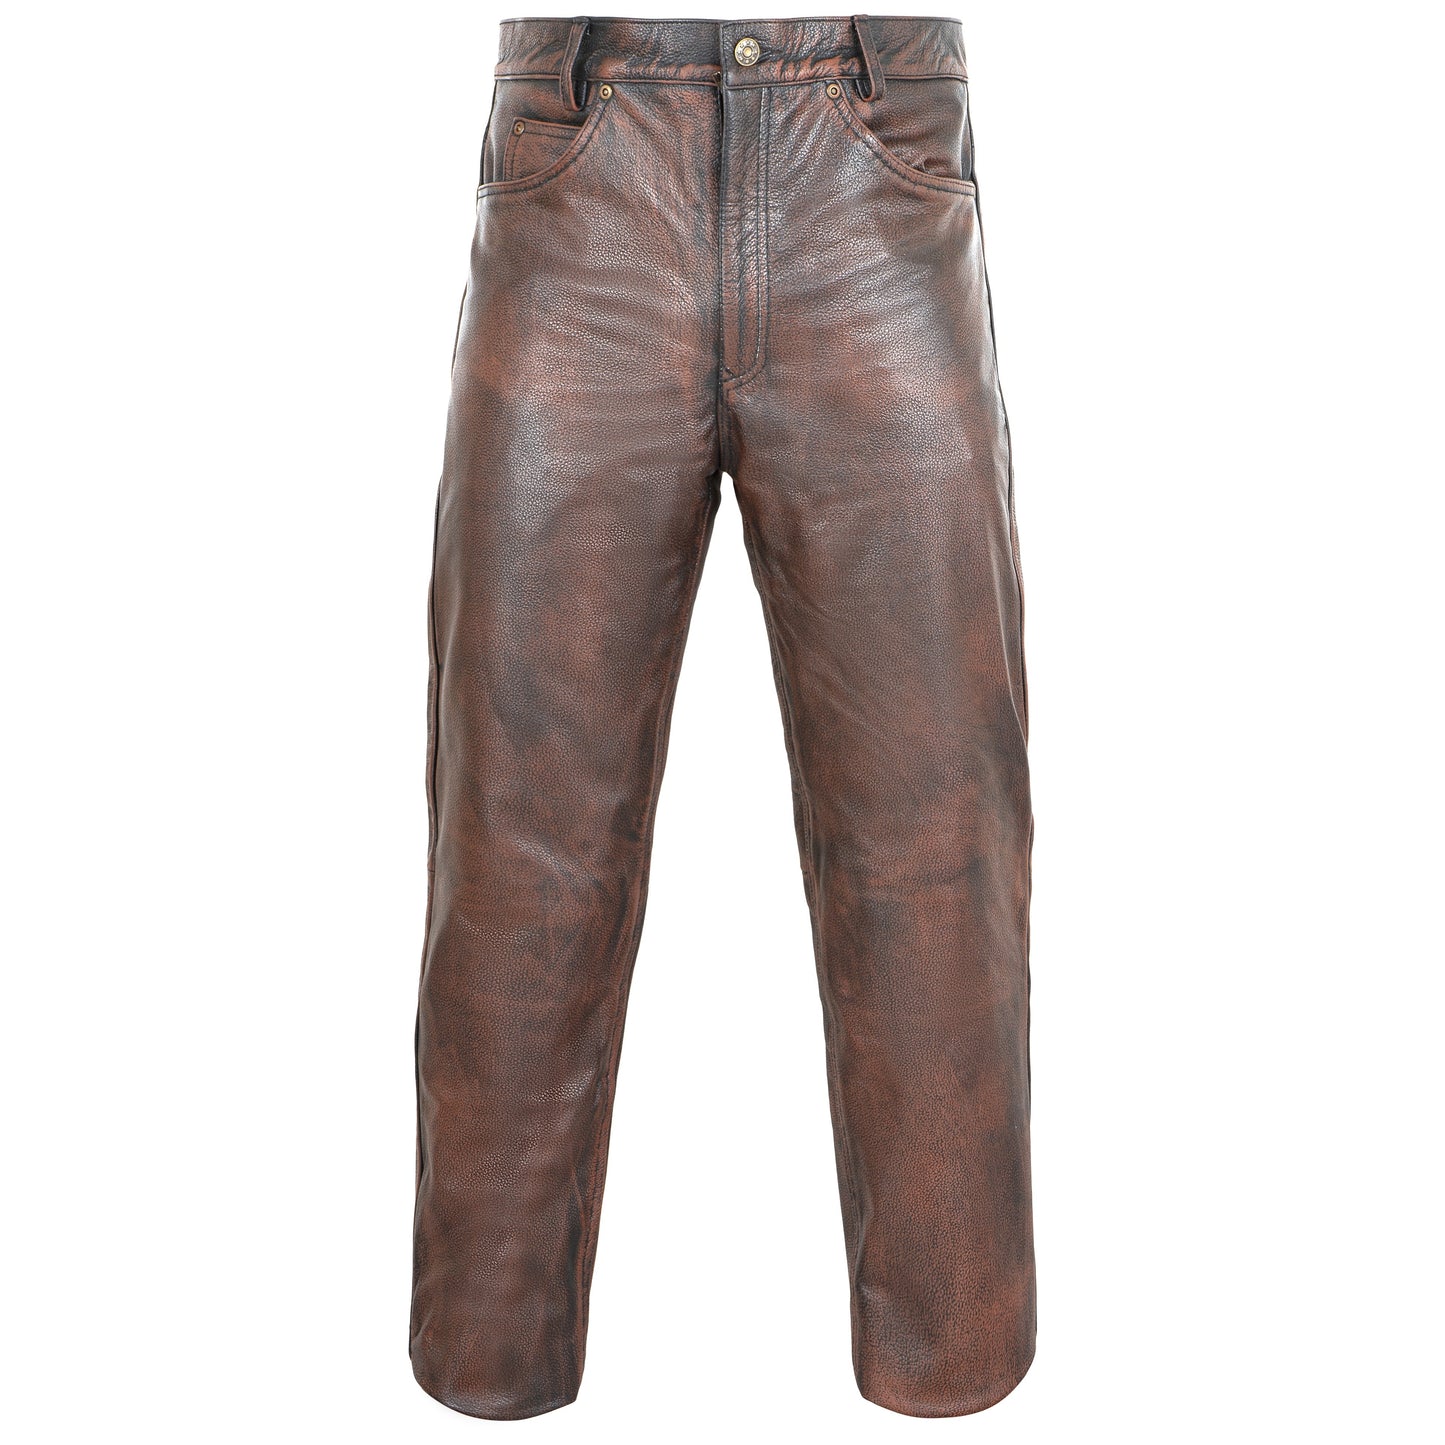 ZAWIAR Men's Brown Distressed Leather Classic Motorcycle Trousers Pants for Bikers